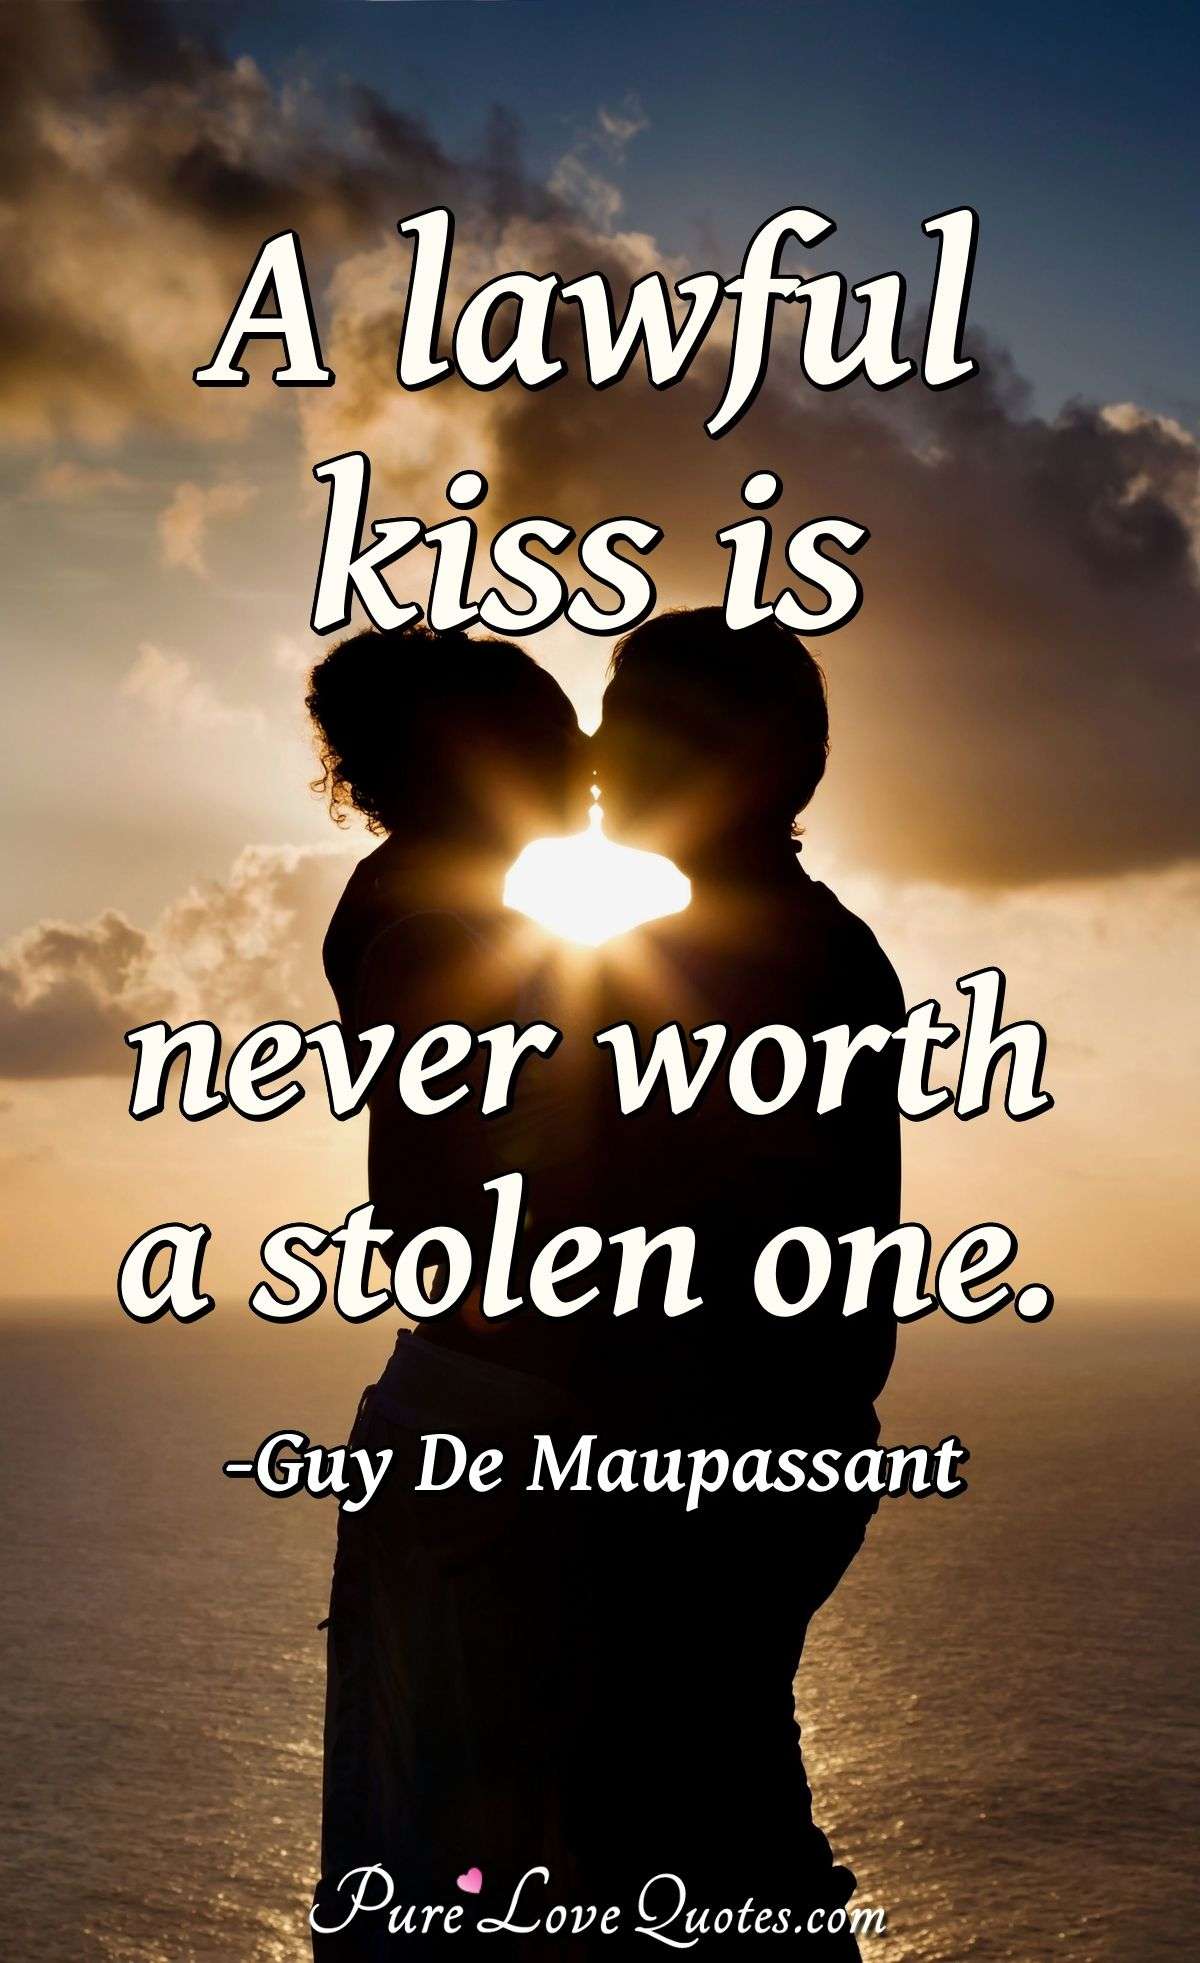 A lawful kiss is never worth a stolen one. - Guy De Maupassant